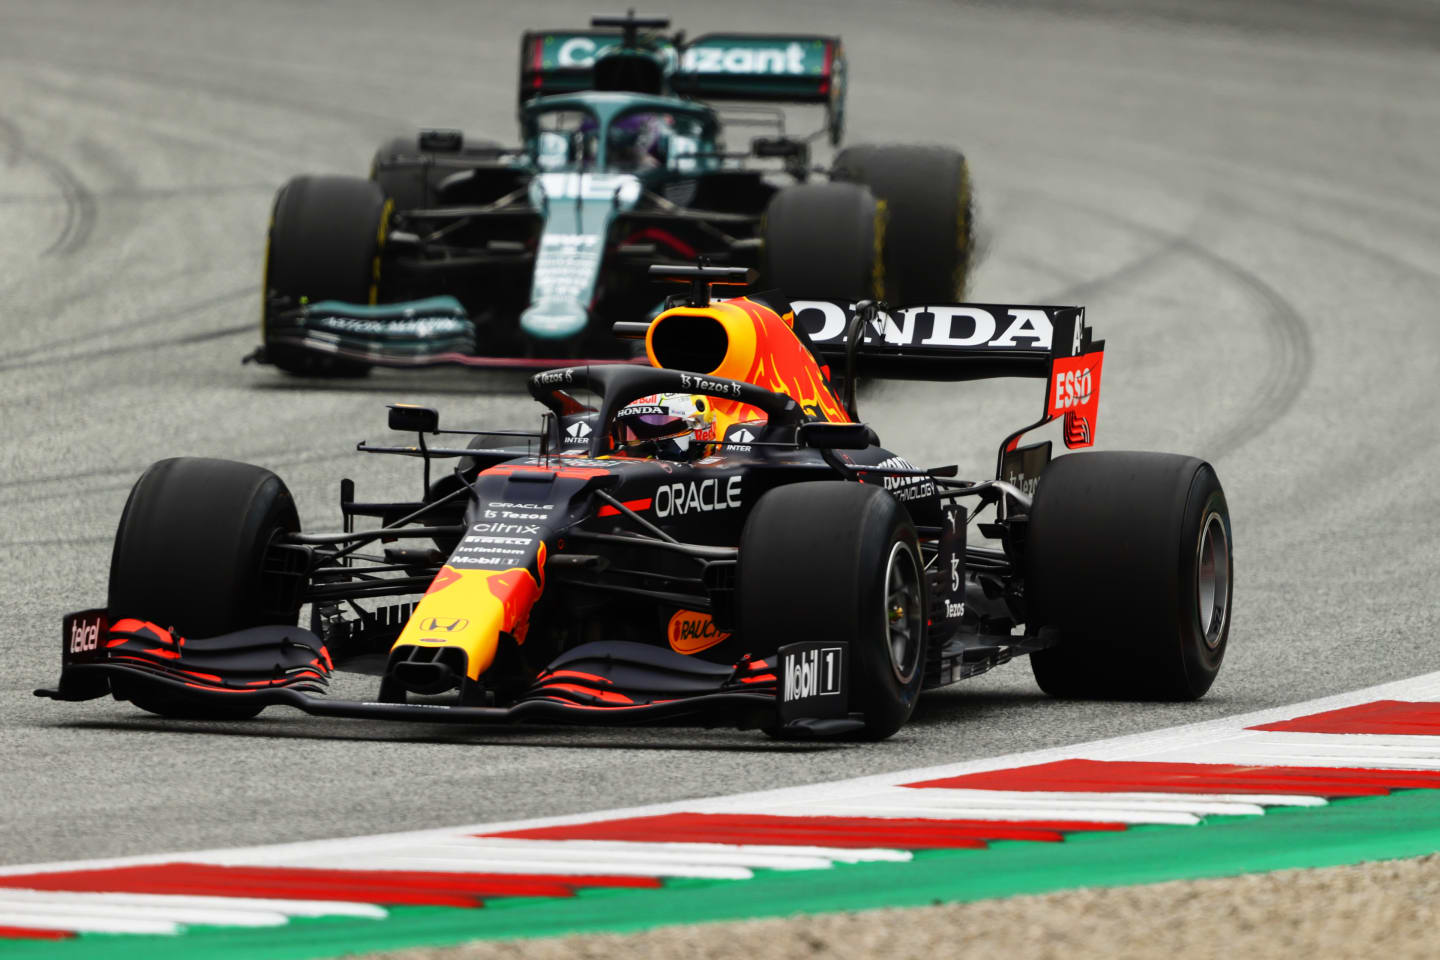 SPIELBERG, AUSTRIA - JULY 02: Max Verstappen of the Netherlands driving the (33) Red Bull Racing